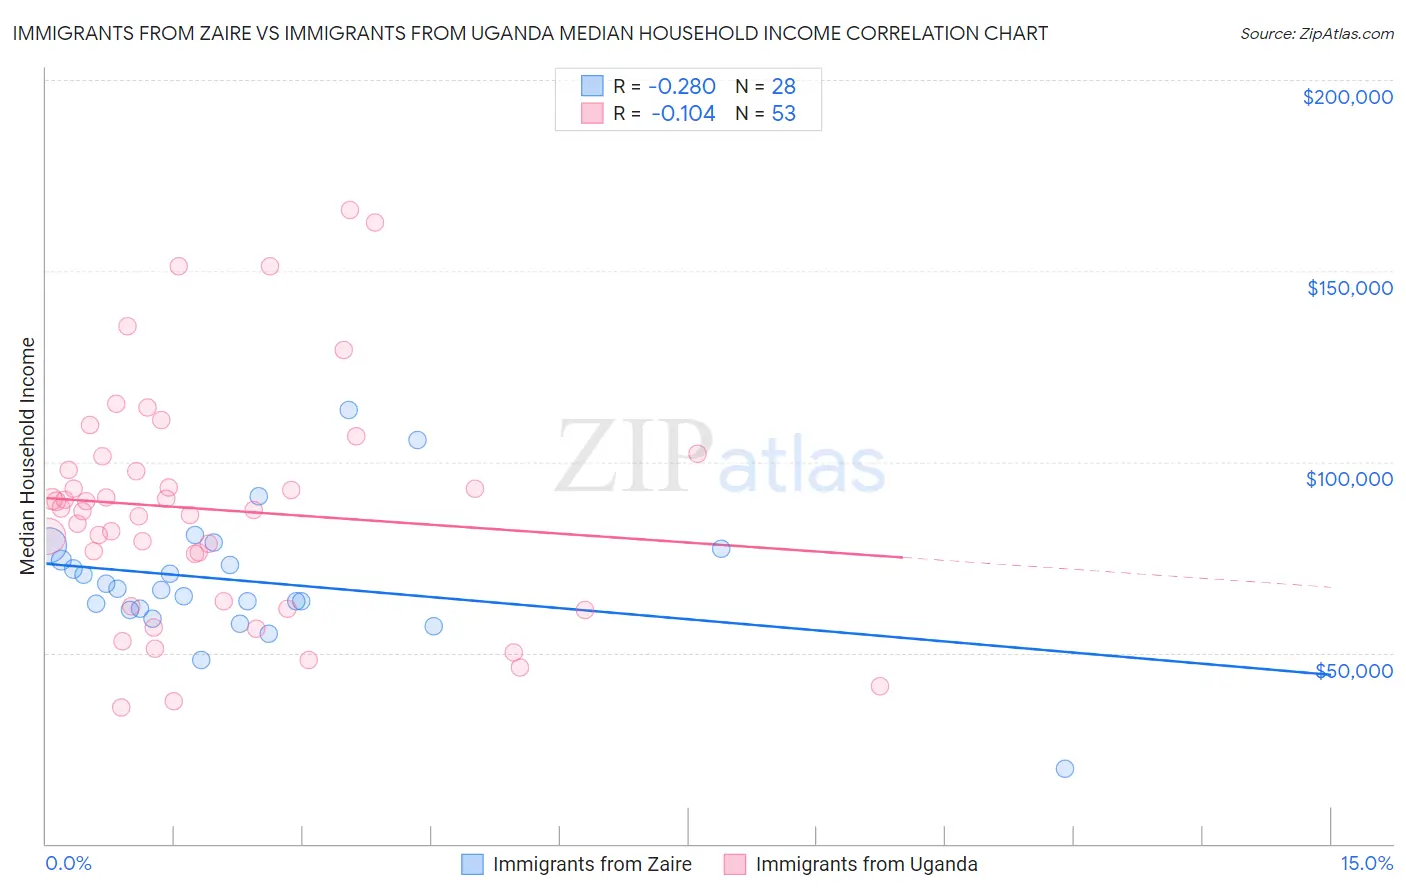 Immigrants from Zaire vs Immigrants from Uganda Median Household Income